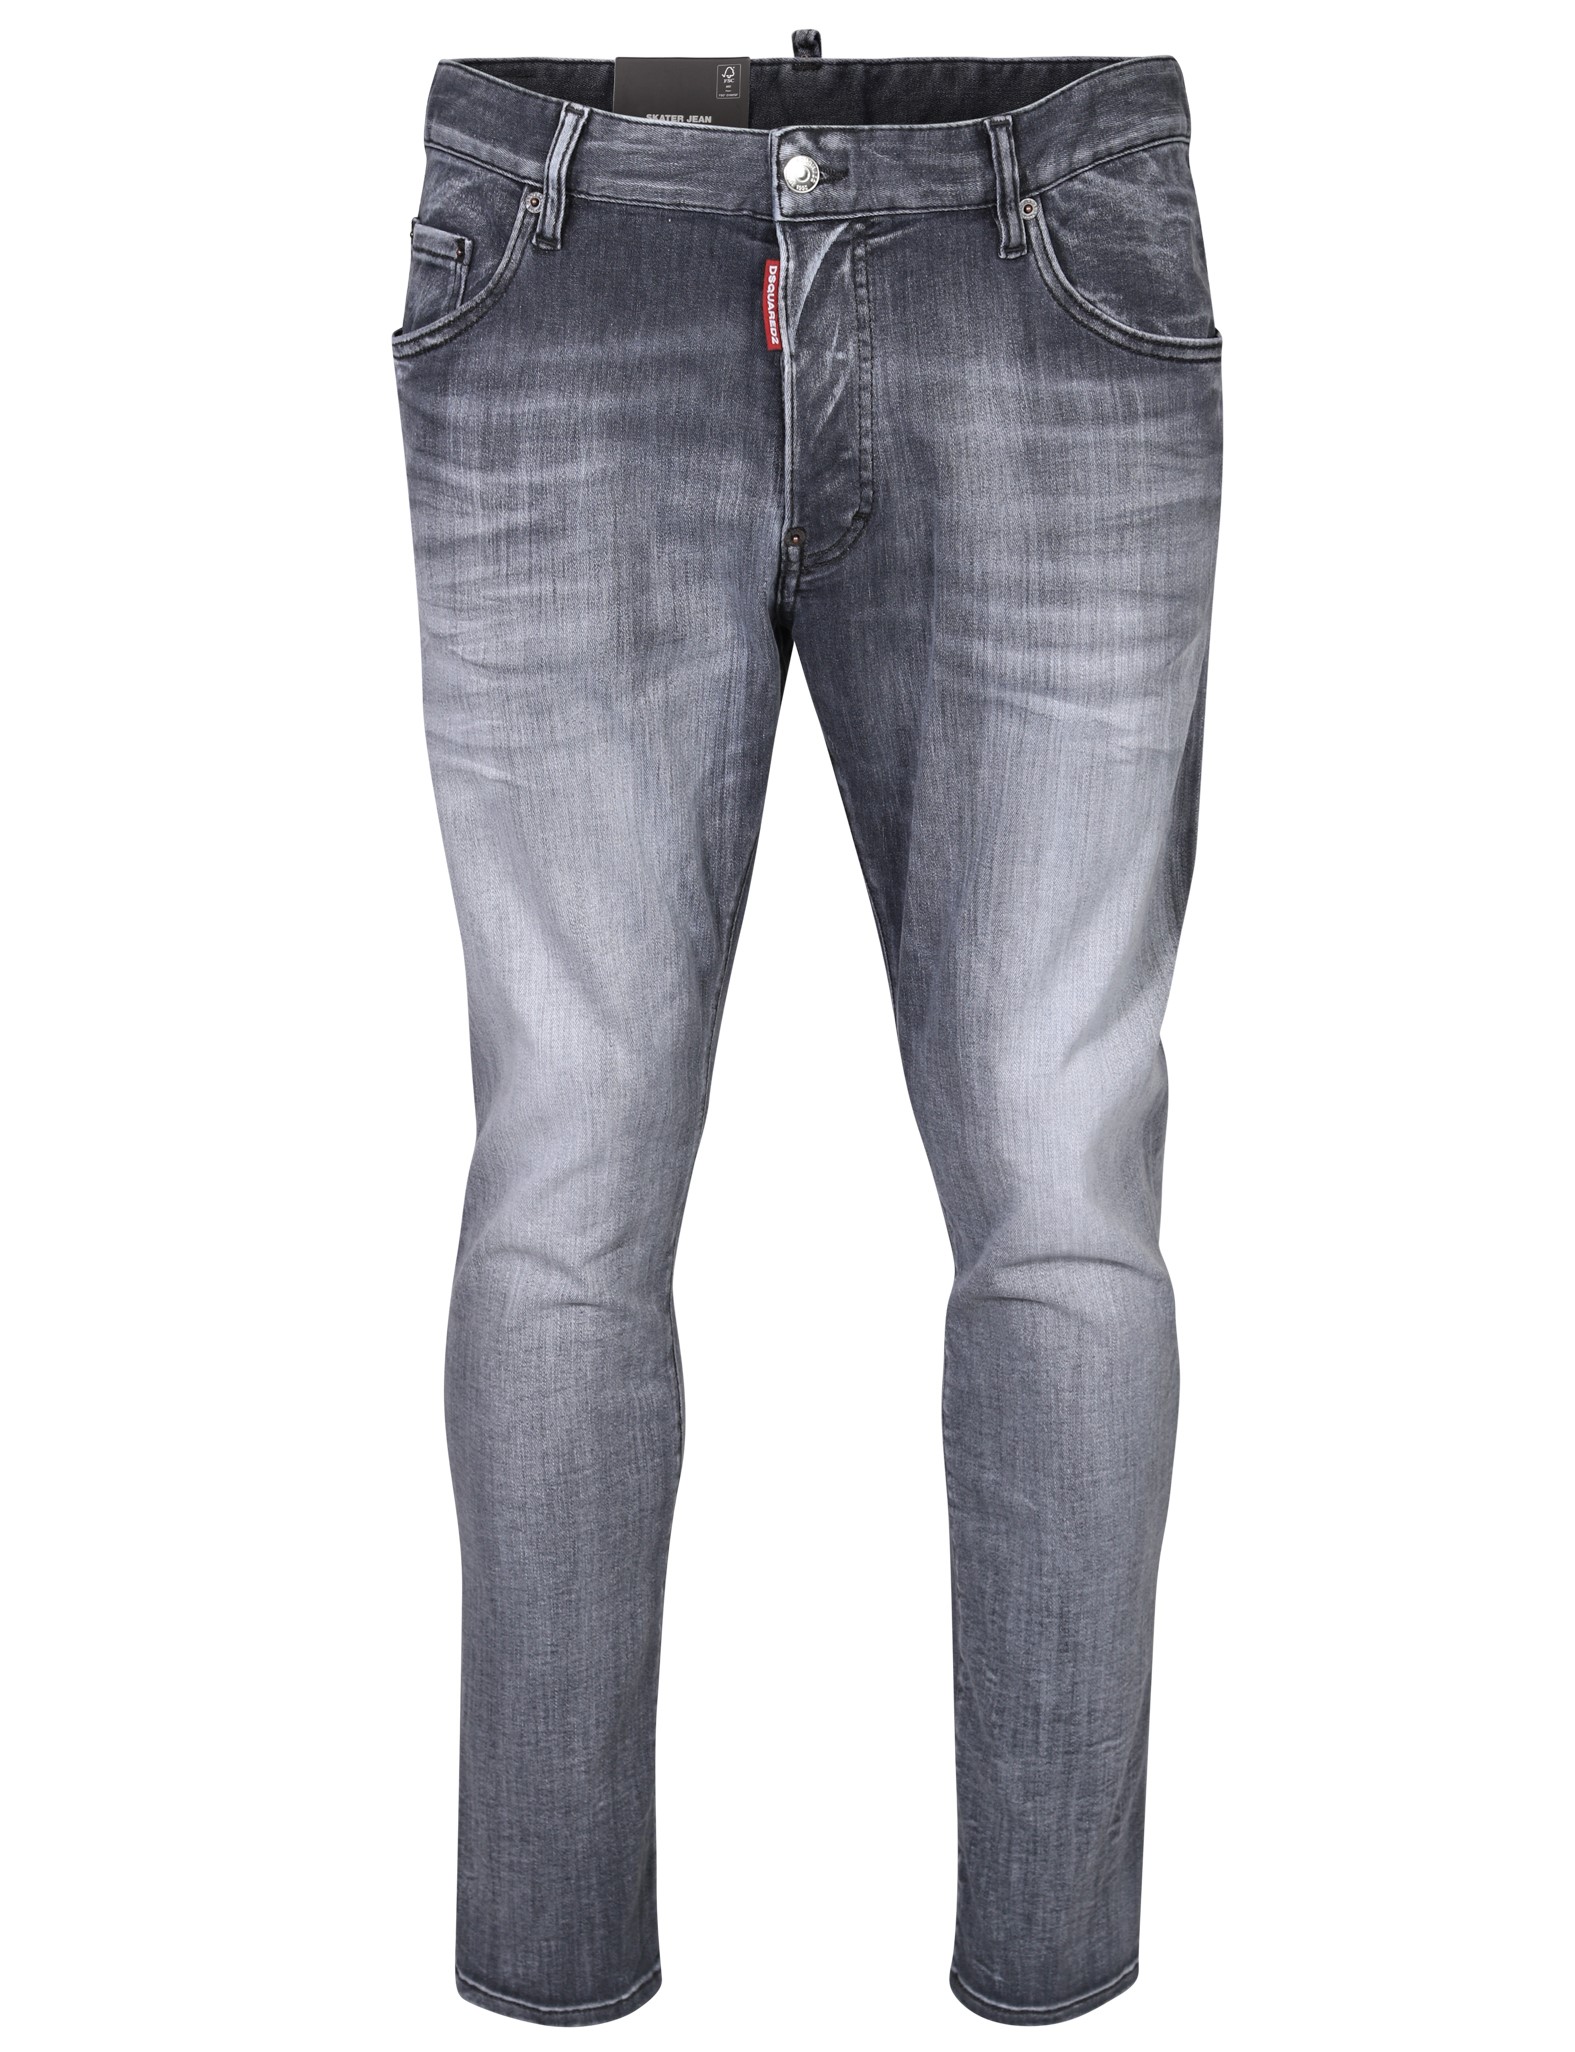 DSQUARED2 Skater Jeans in Washed Grey 50